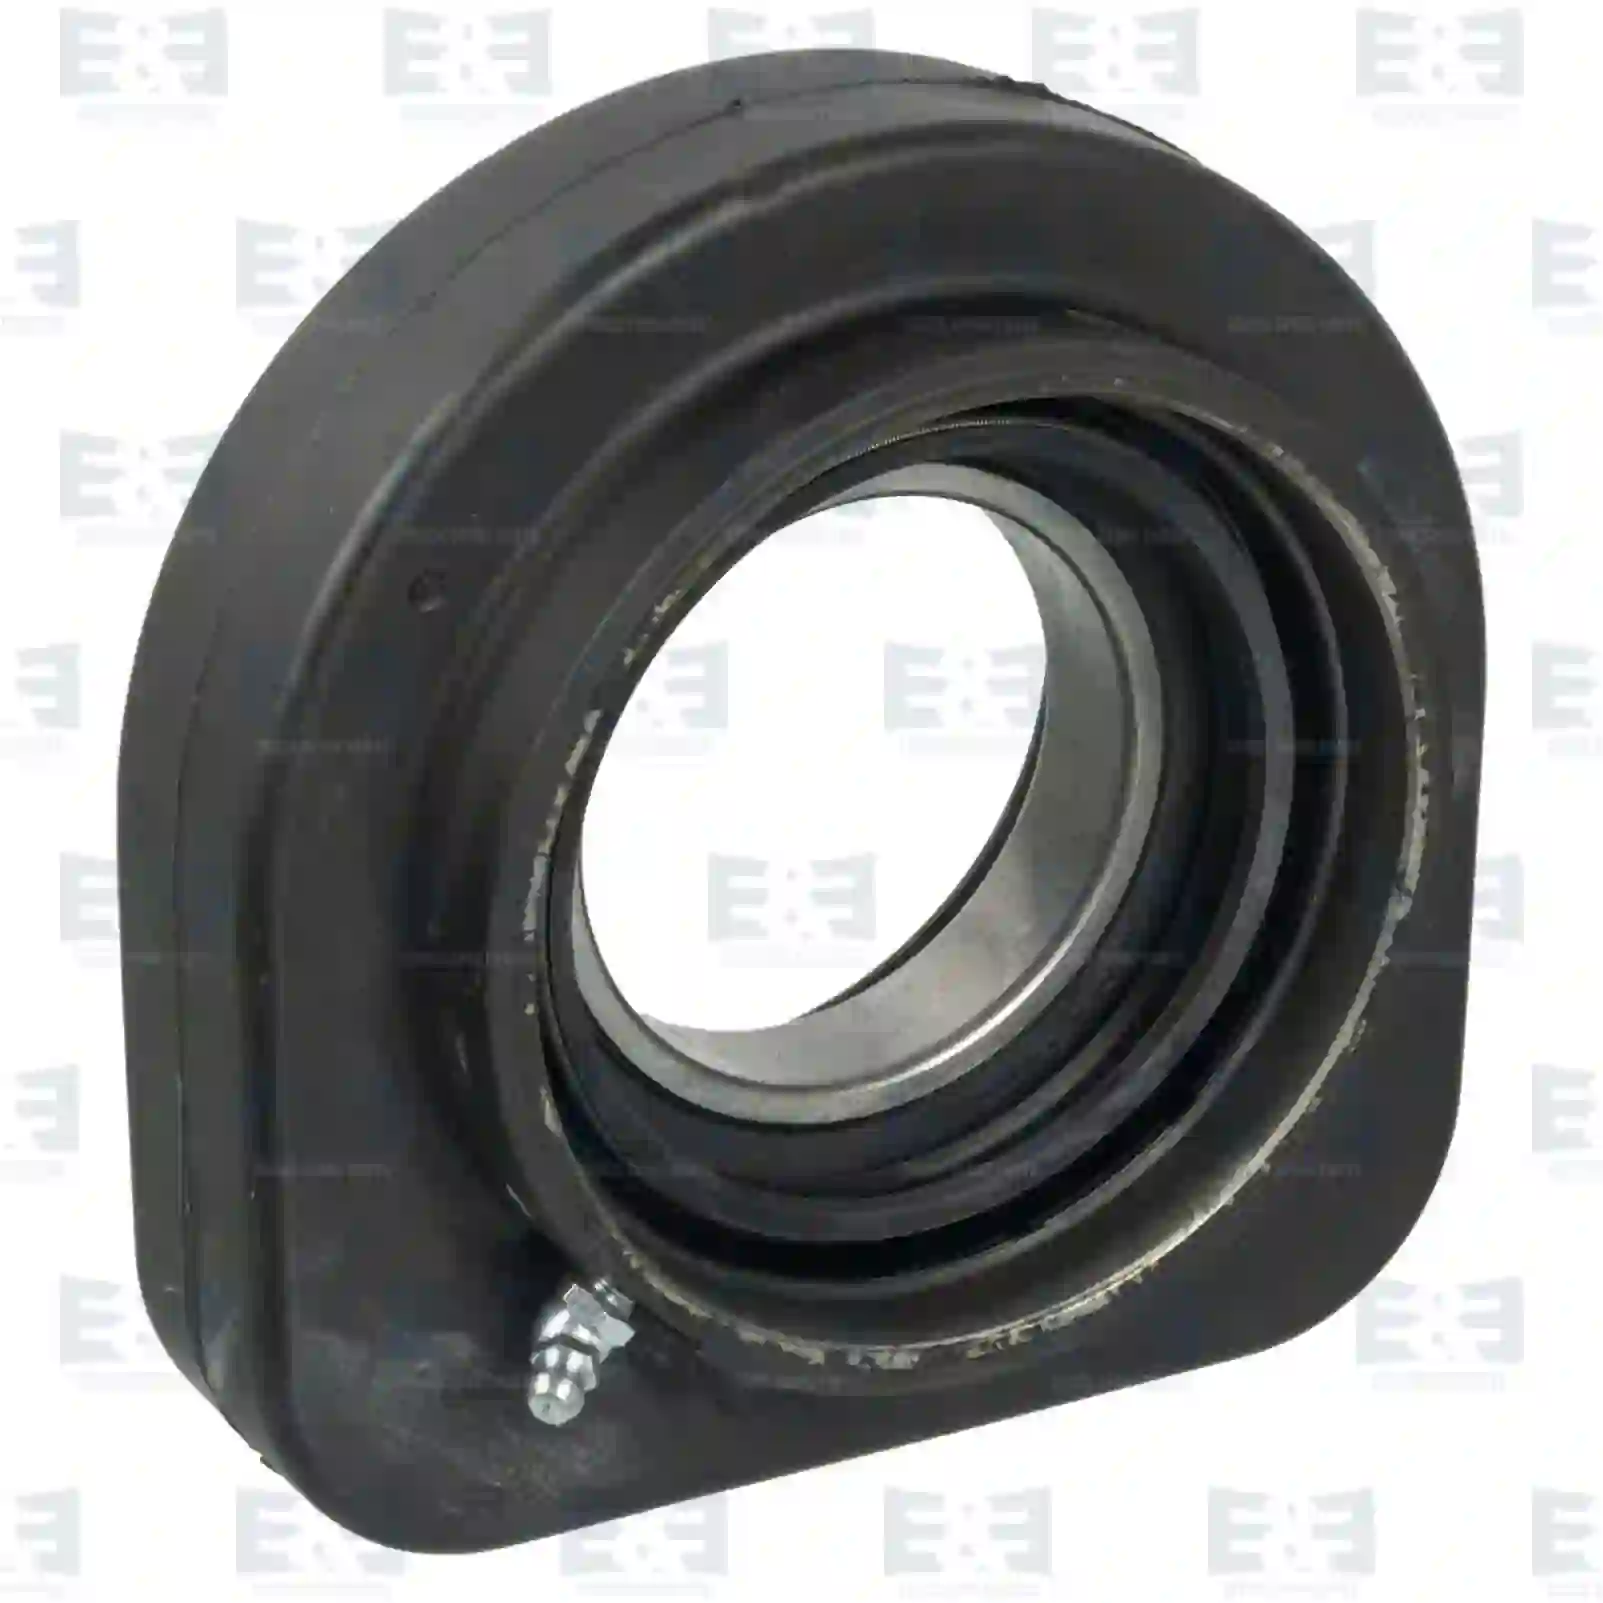 Support Bearing Center bearing, EE No 2E2276897 ,  oem no:263567, 8171366 E&E Truck Spare Parts | Truck Spare Parts, Auotomotive Spare Parts